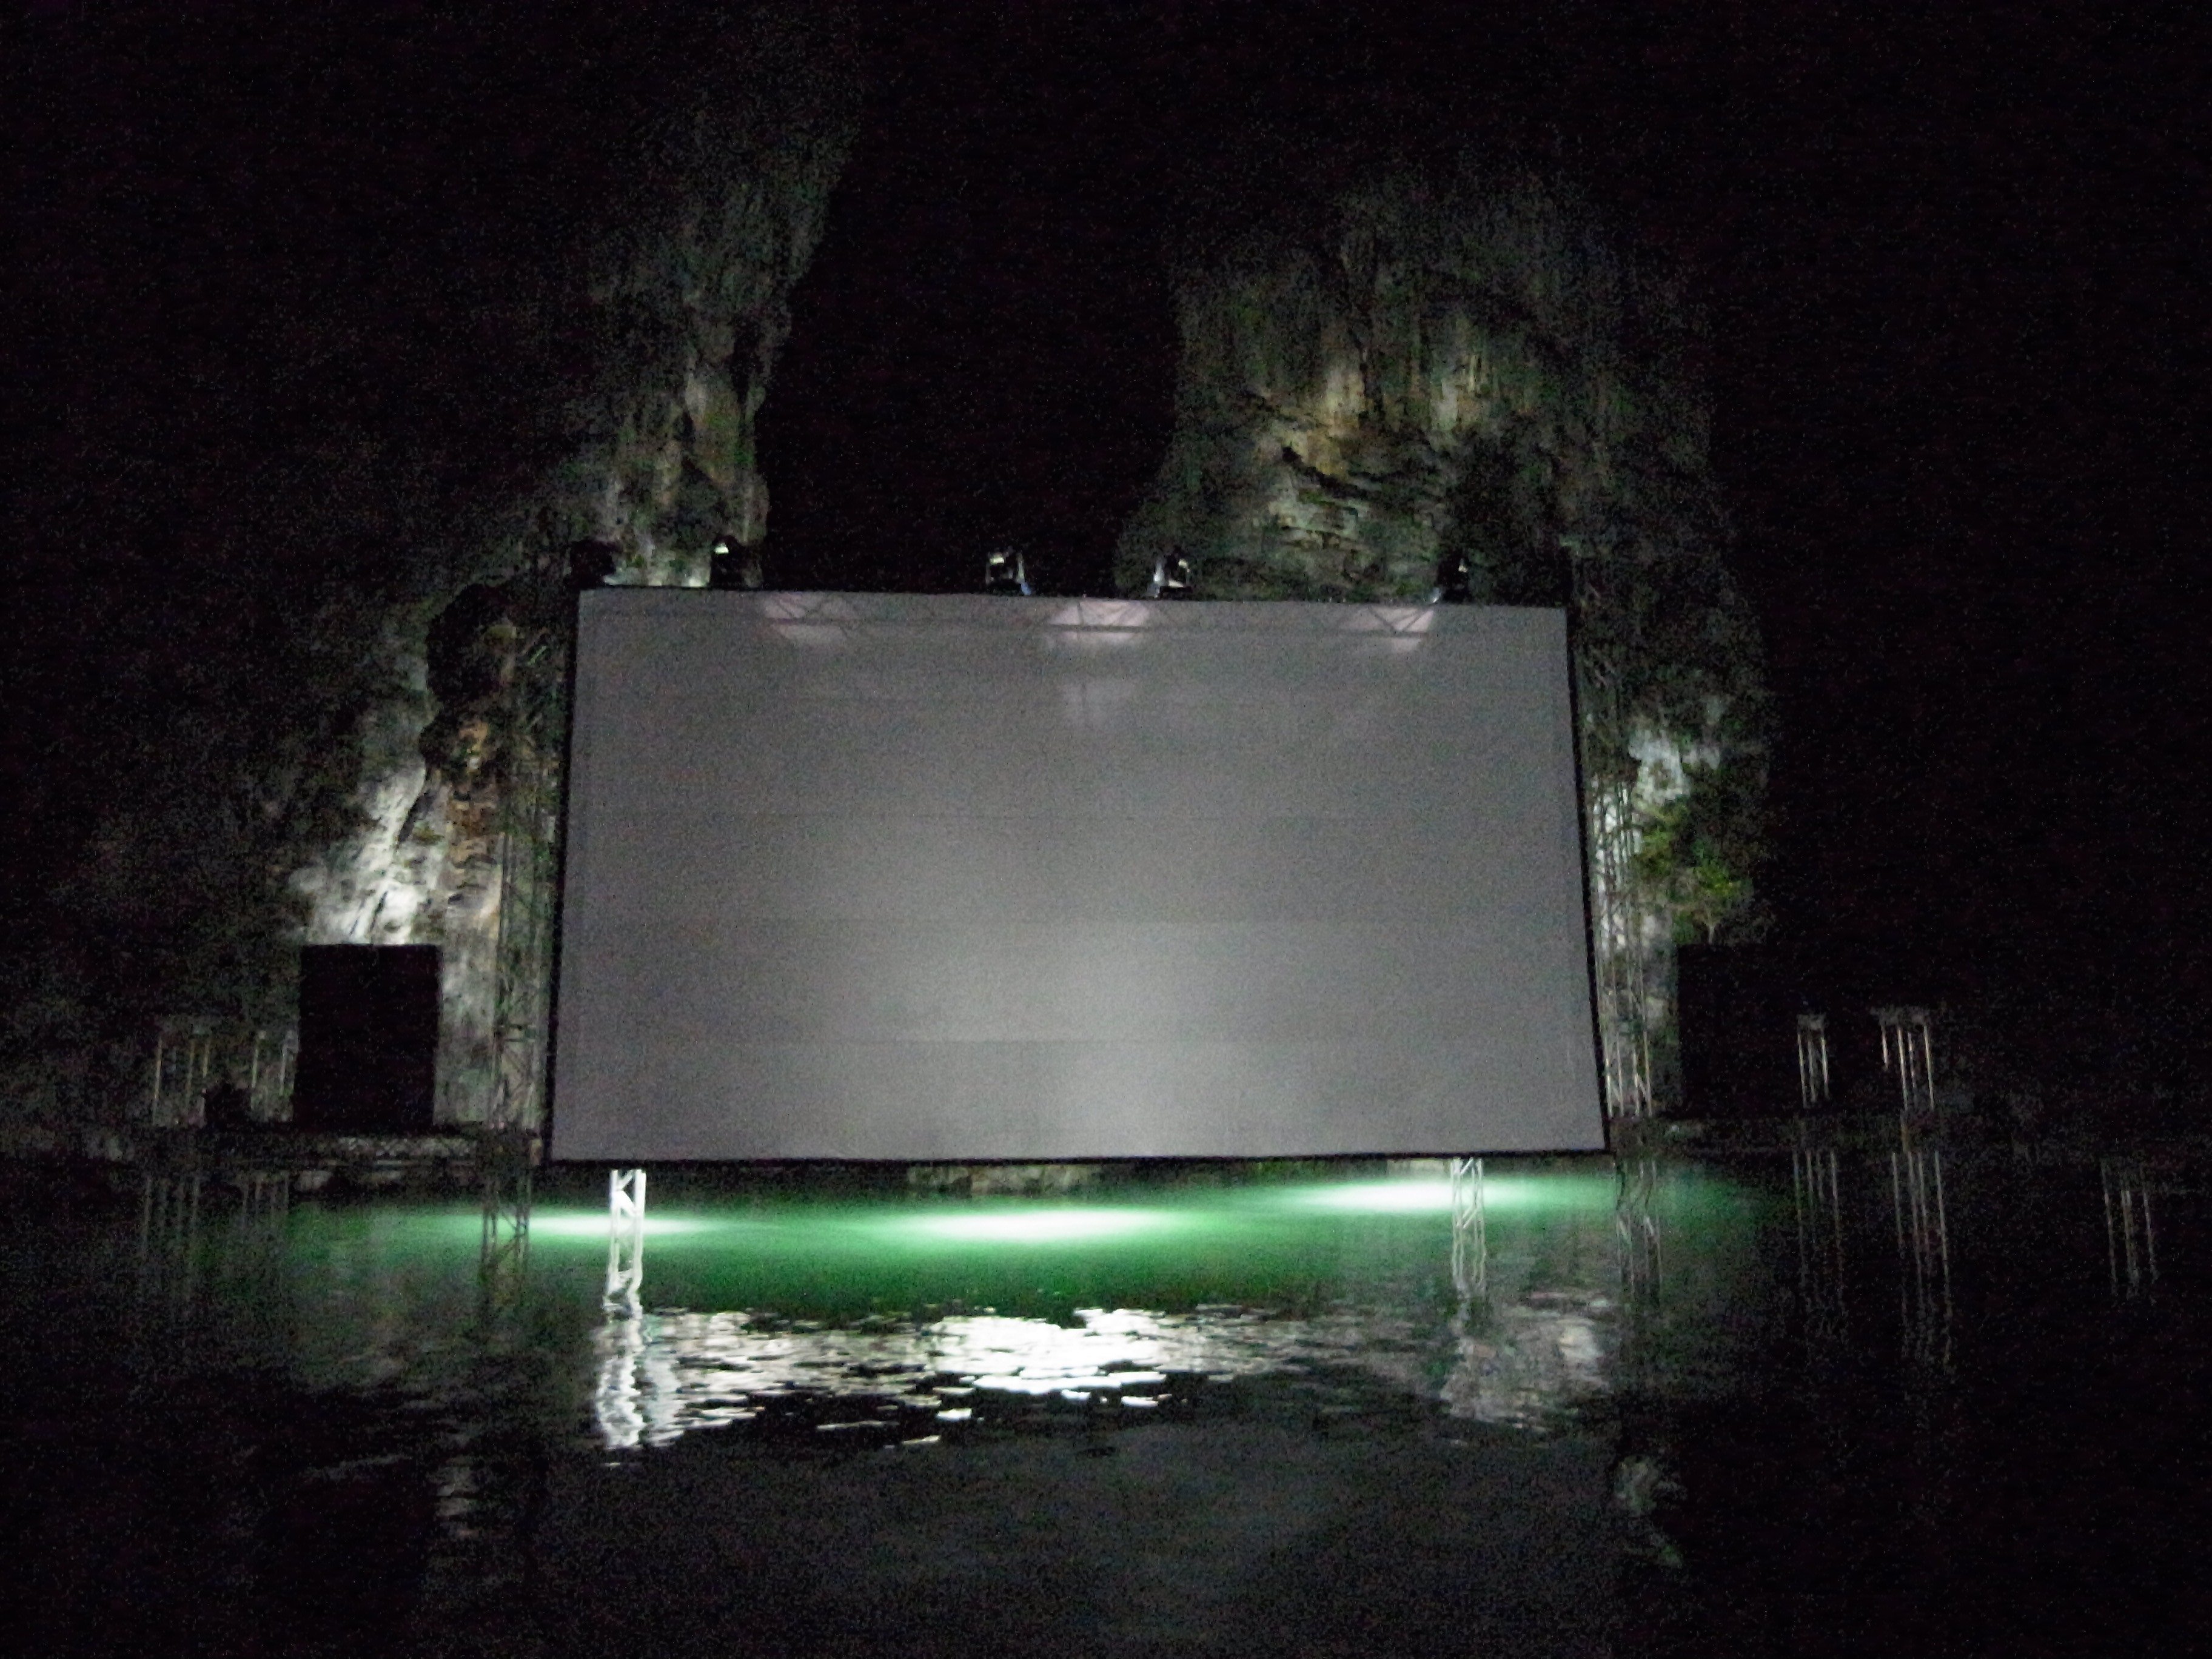 Cinema in Phuket - Going to the Movies!